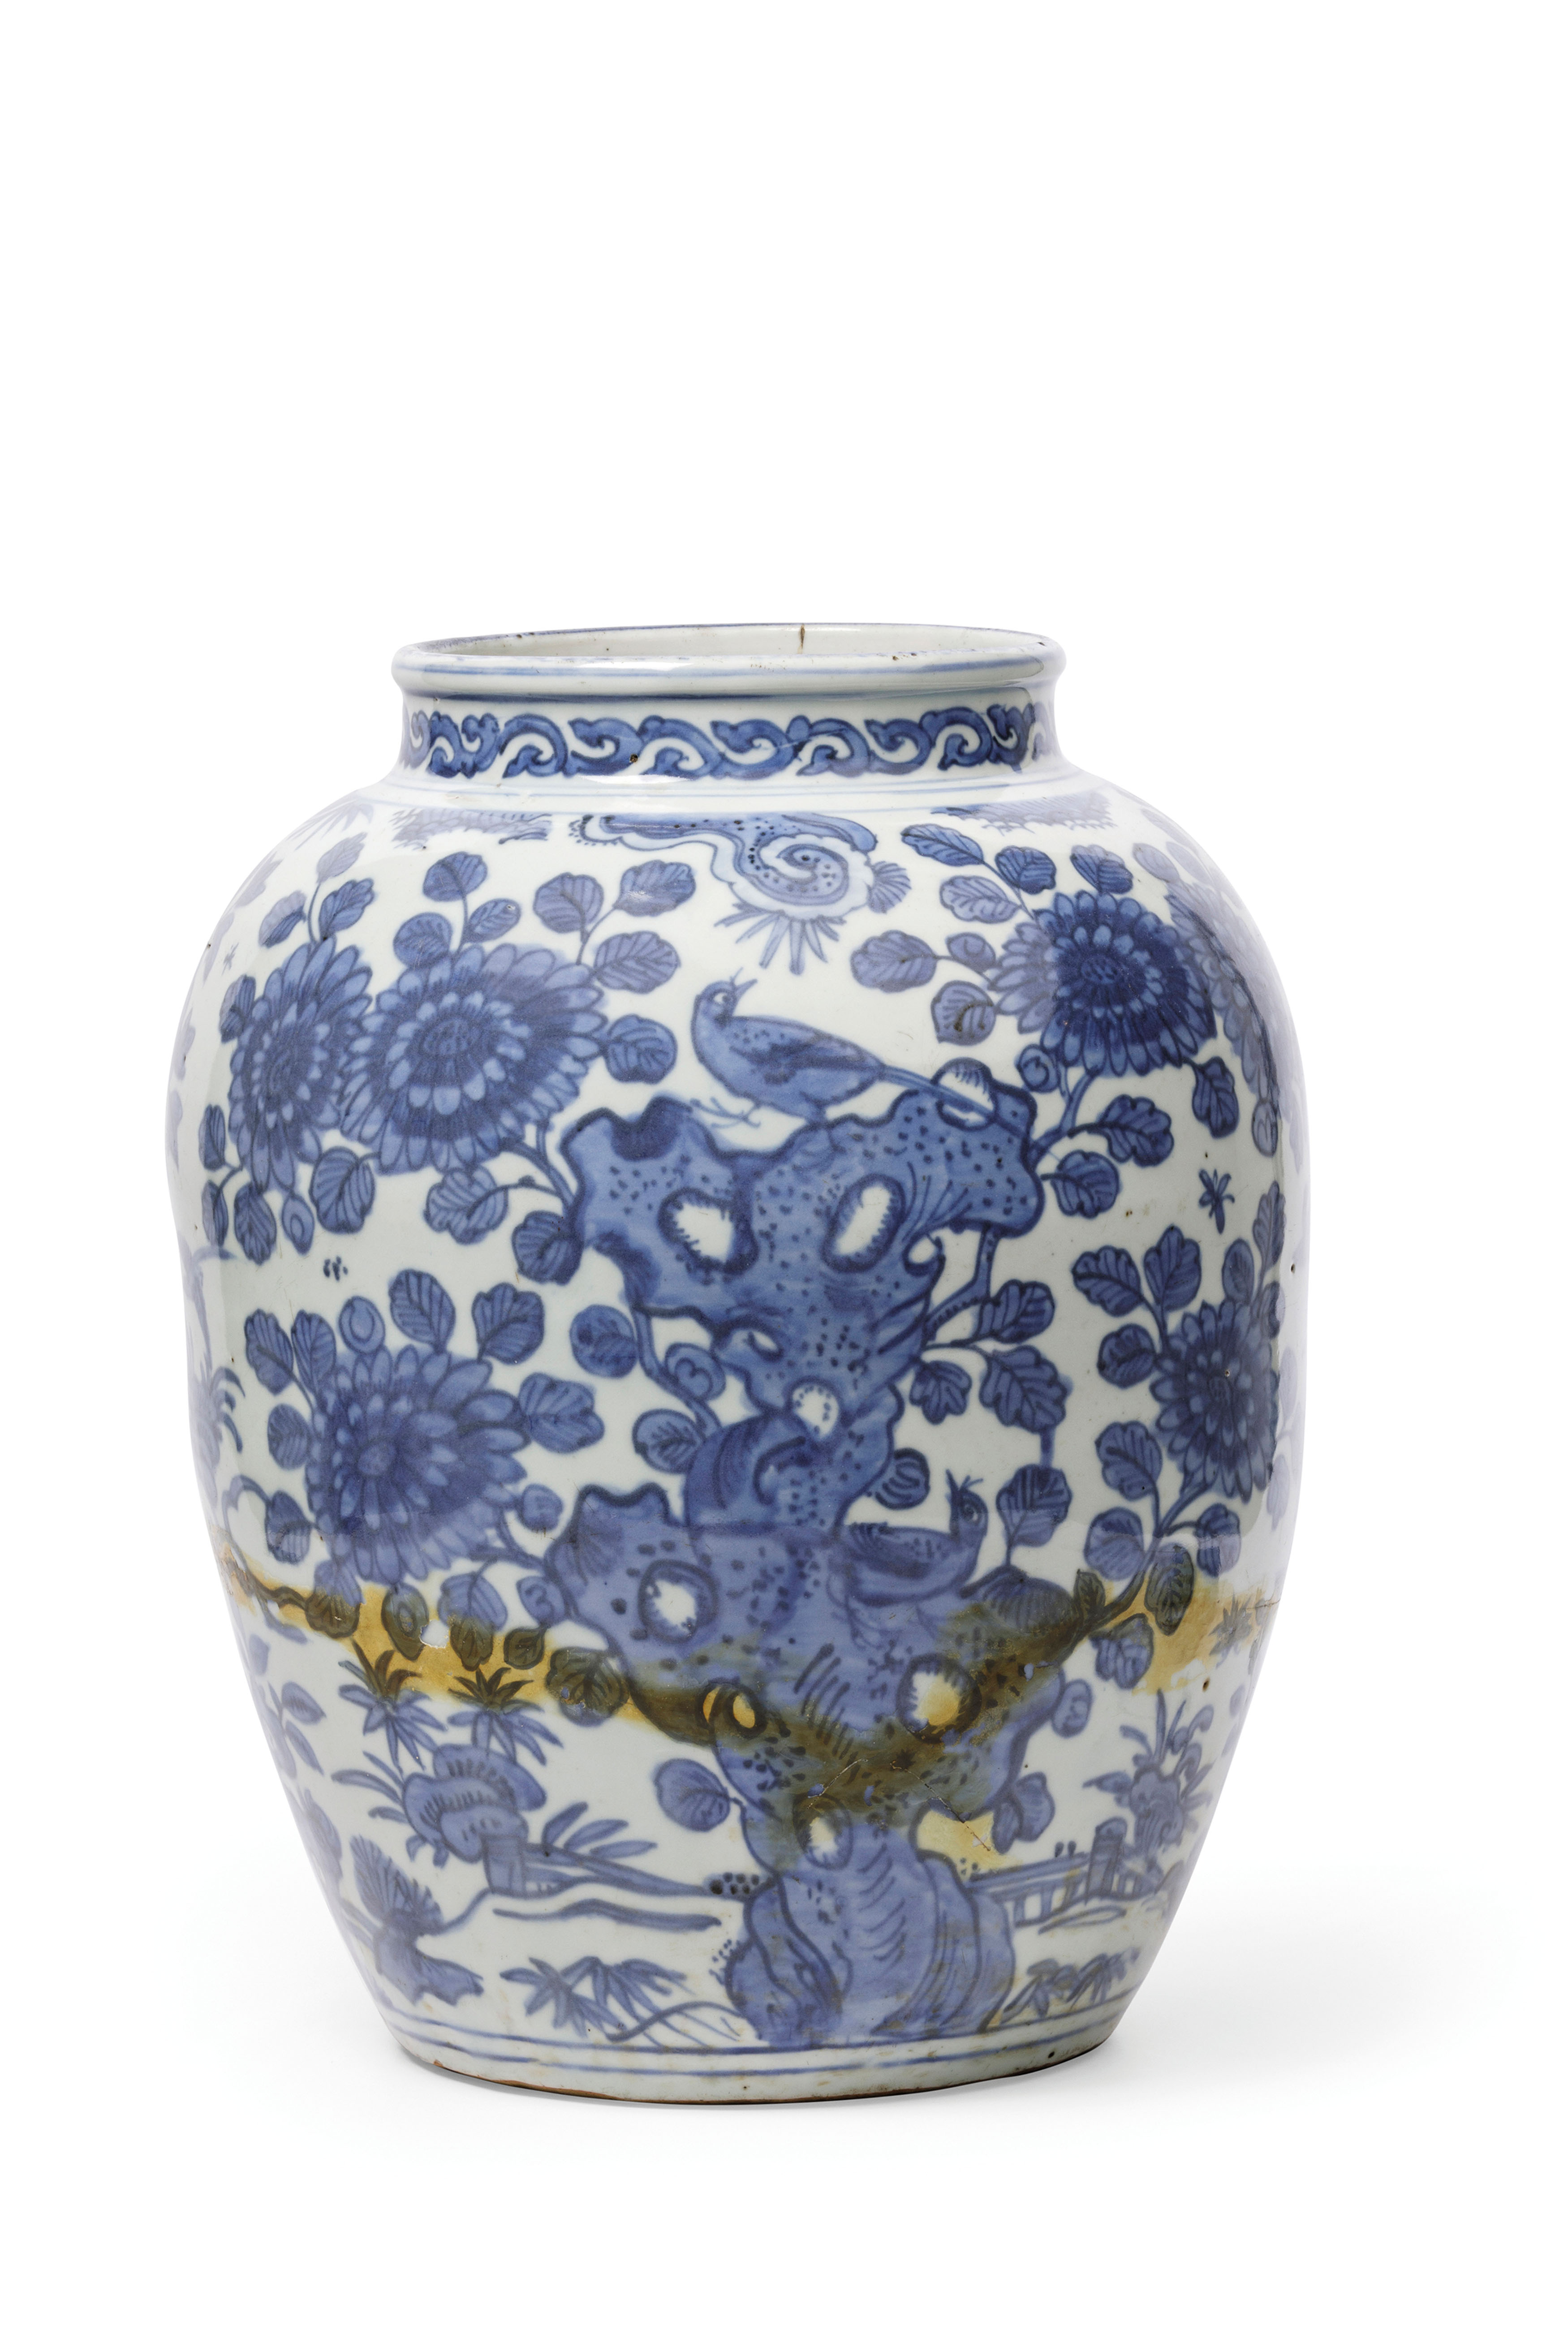 A LARGE BLUE AND WHITE PORCELAIN JAR, CHINA, 17TH-18TH CENTURY - Image 2 of 2